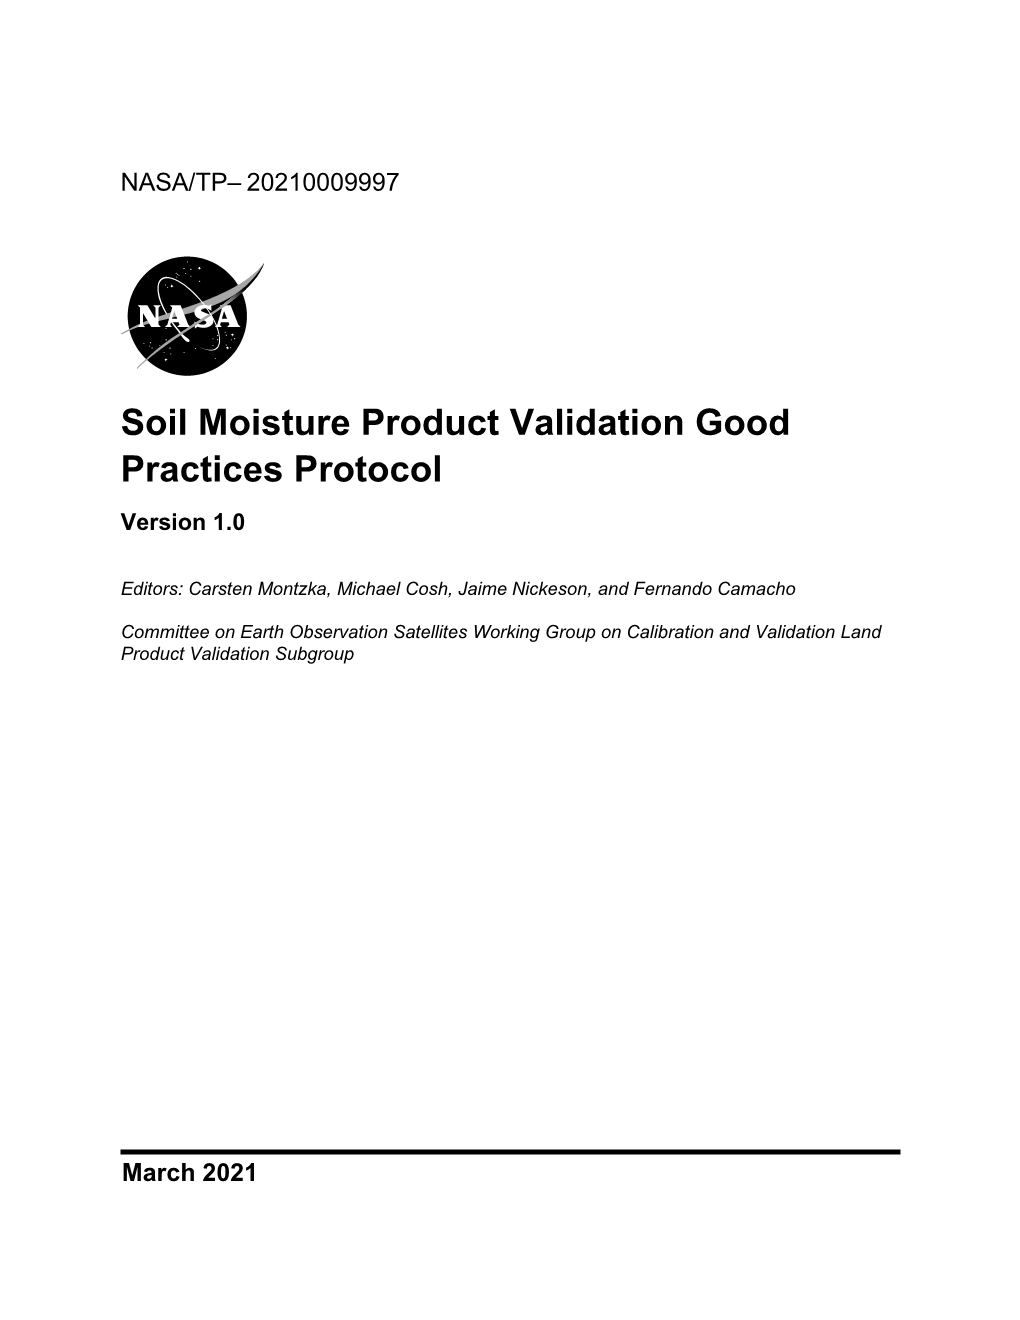 Soil Moisture Product Validation Good Practices Protocol